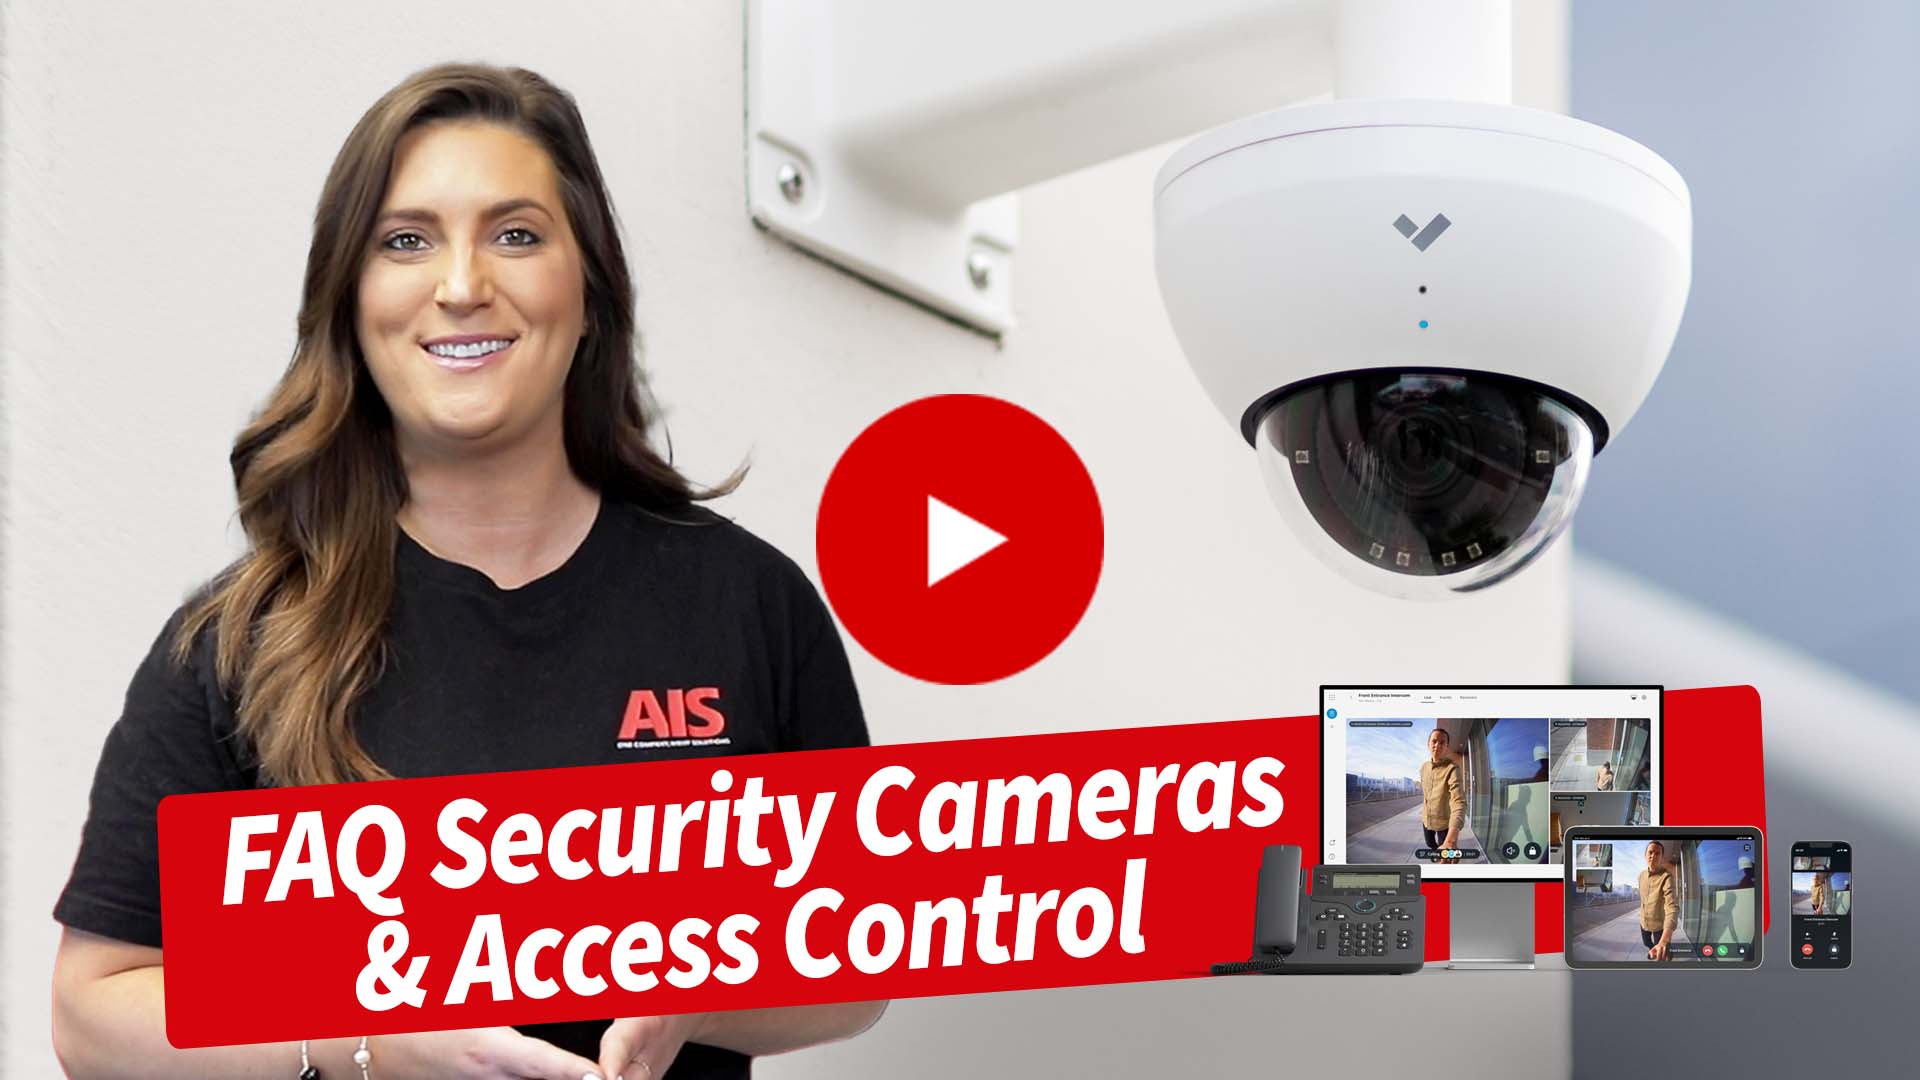 FAQ About Security Cameras & Access Control